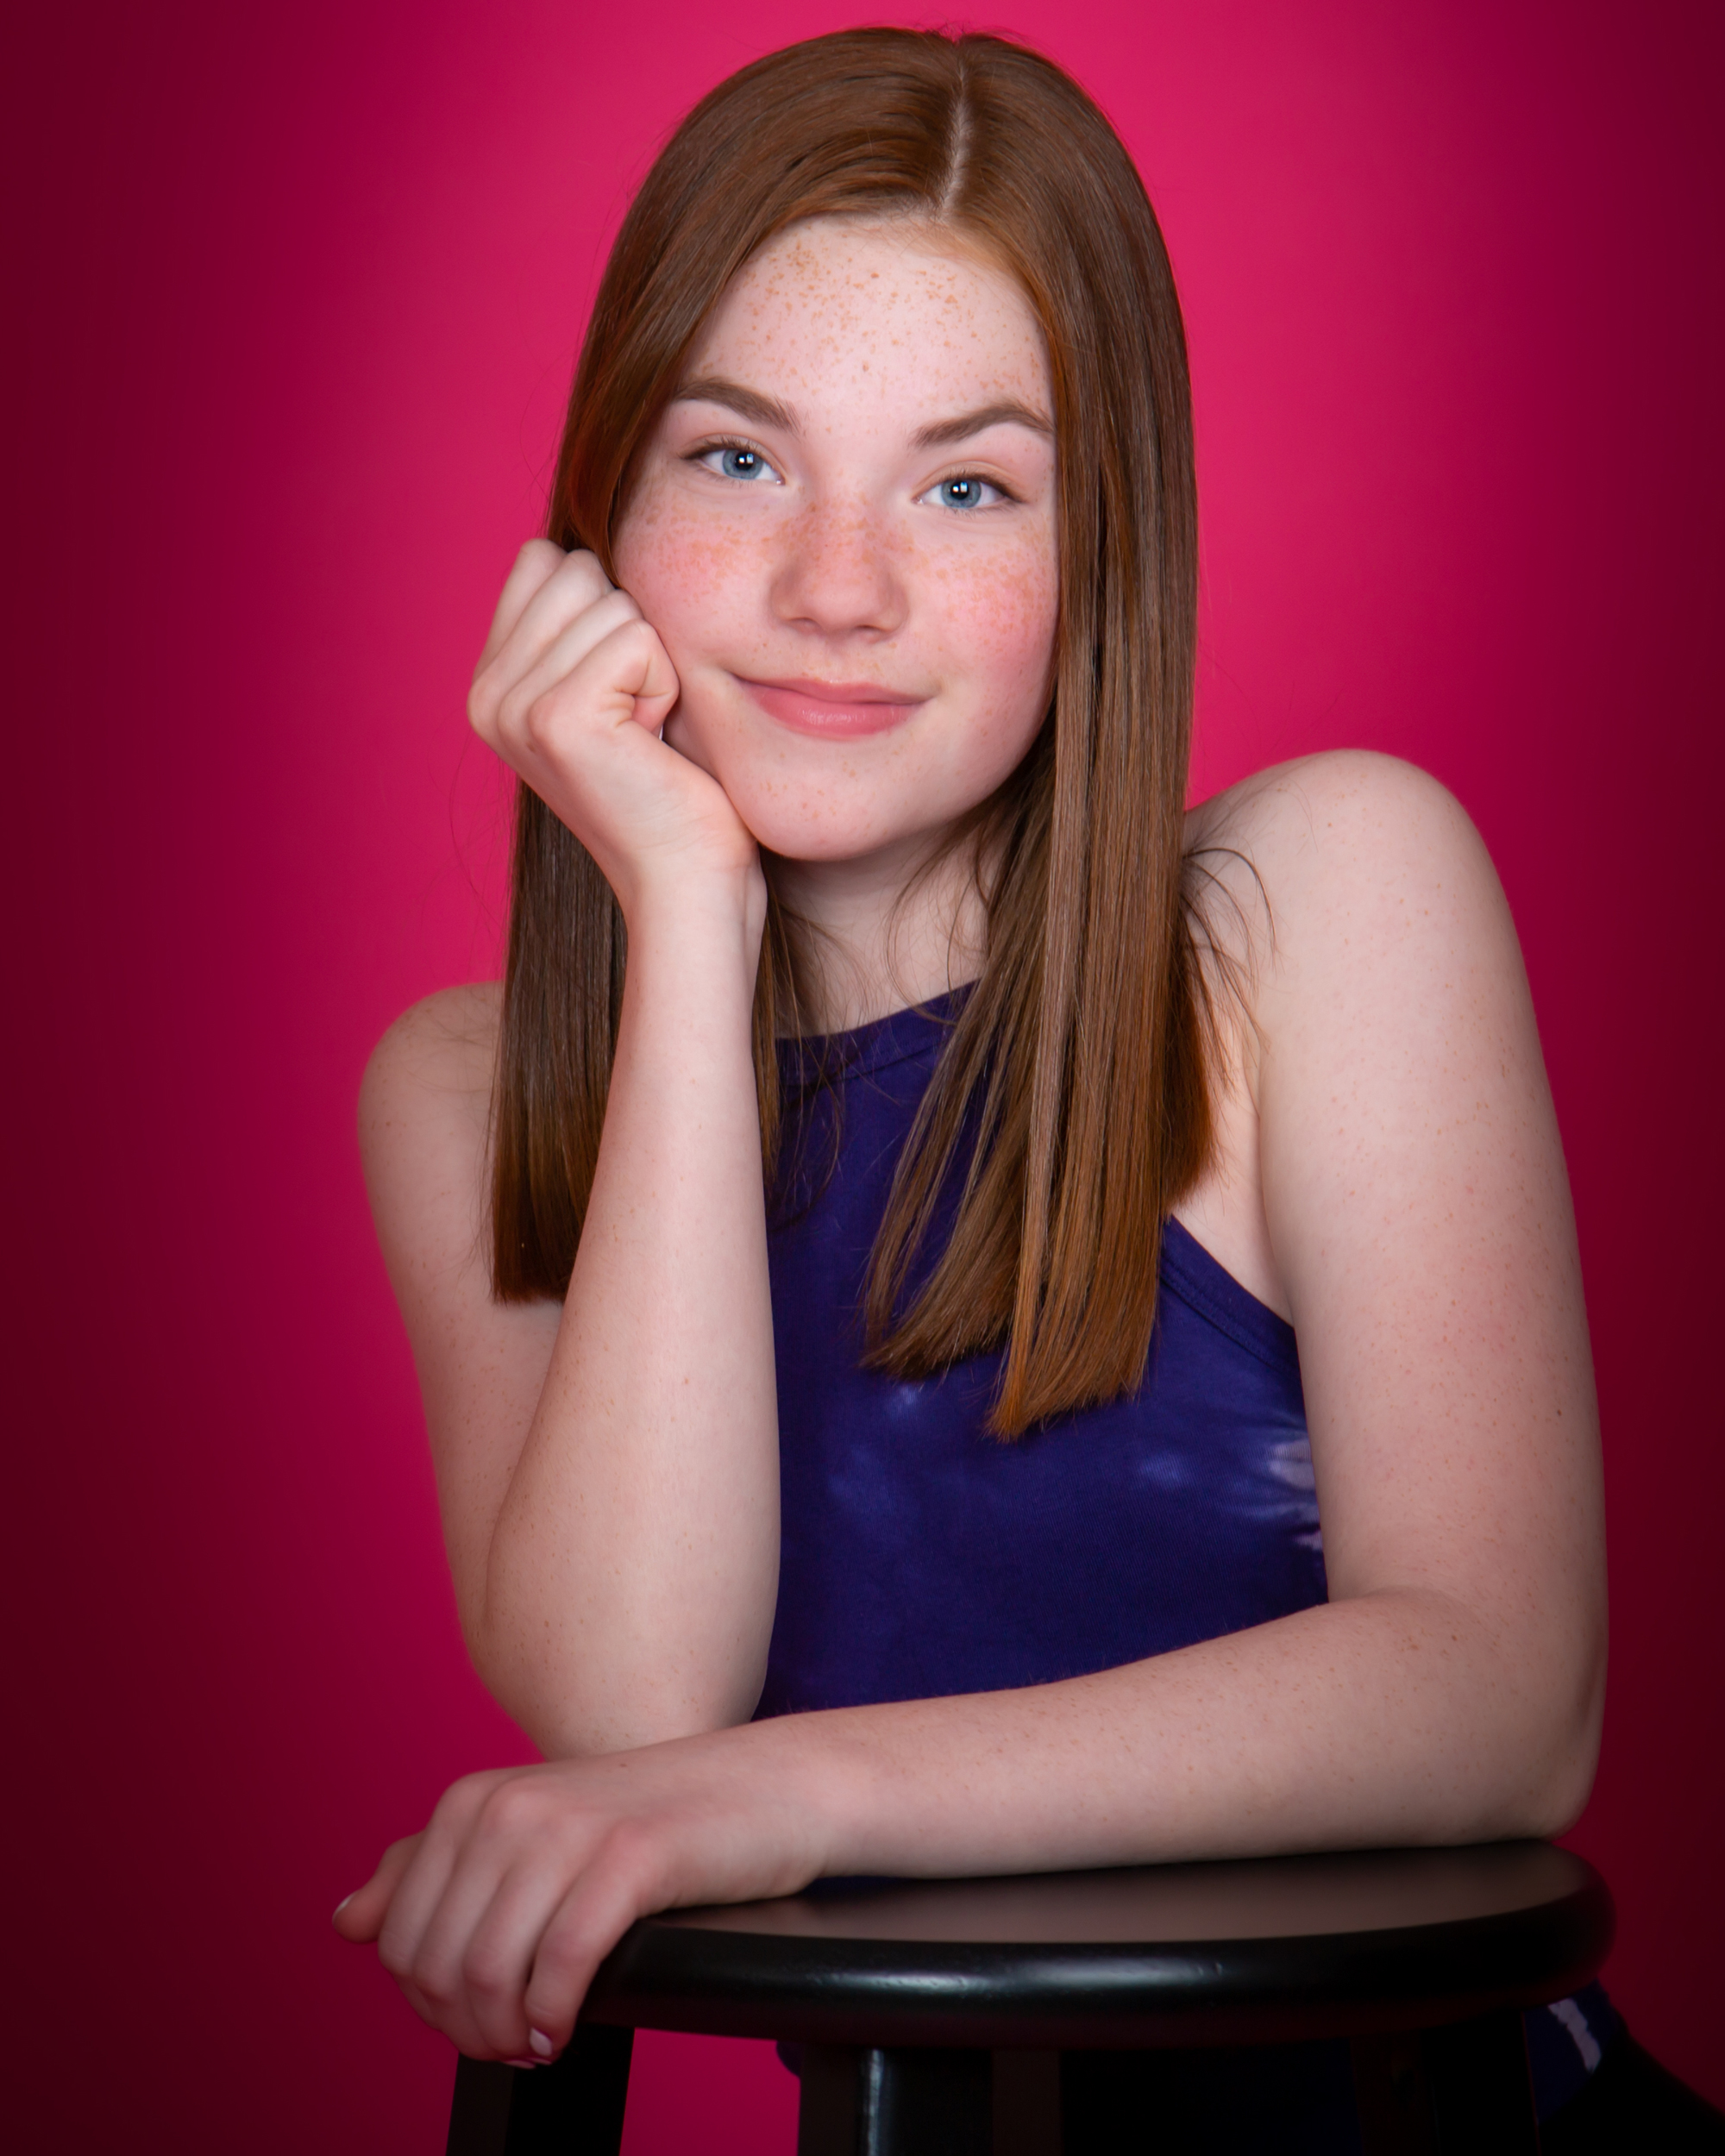 A young model is posed with her arms on a stool against a magenta background.